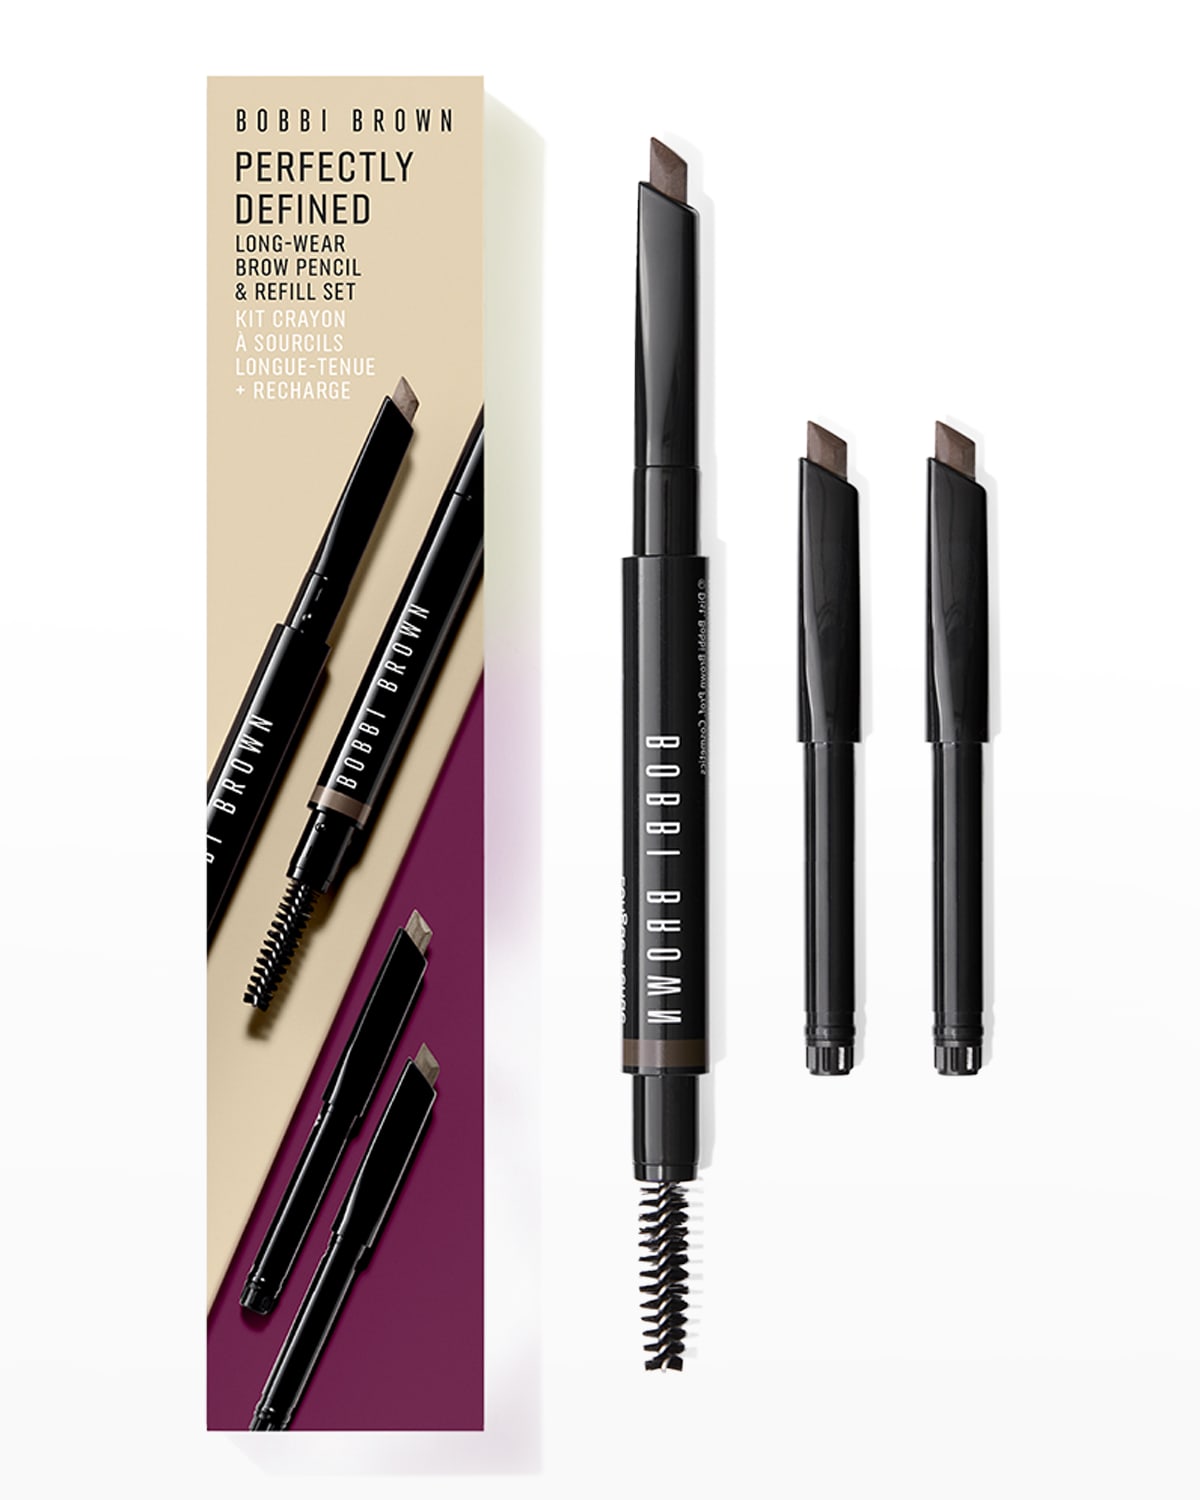 Bobbi Brown Perfectly Defined Long Wear Brow Pencil Refill Set ($101 Value)